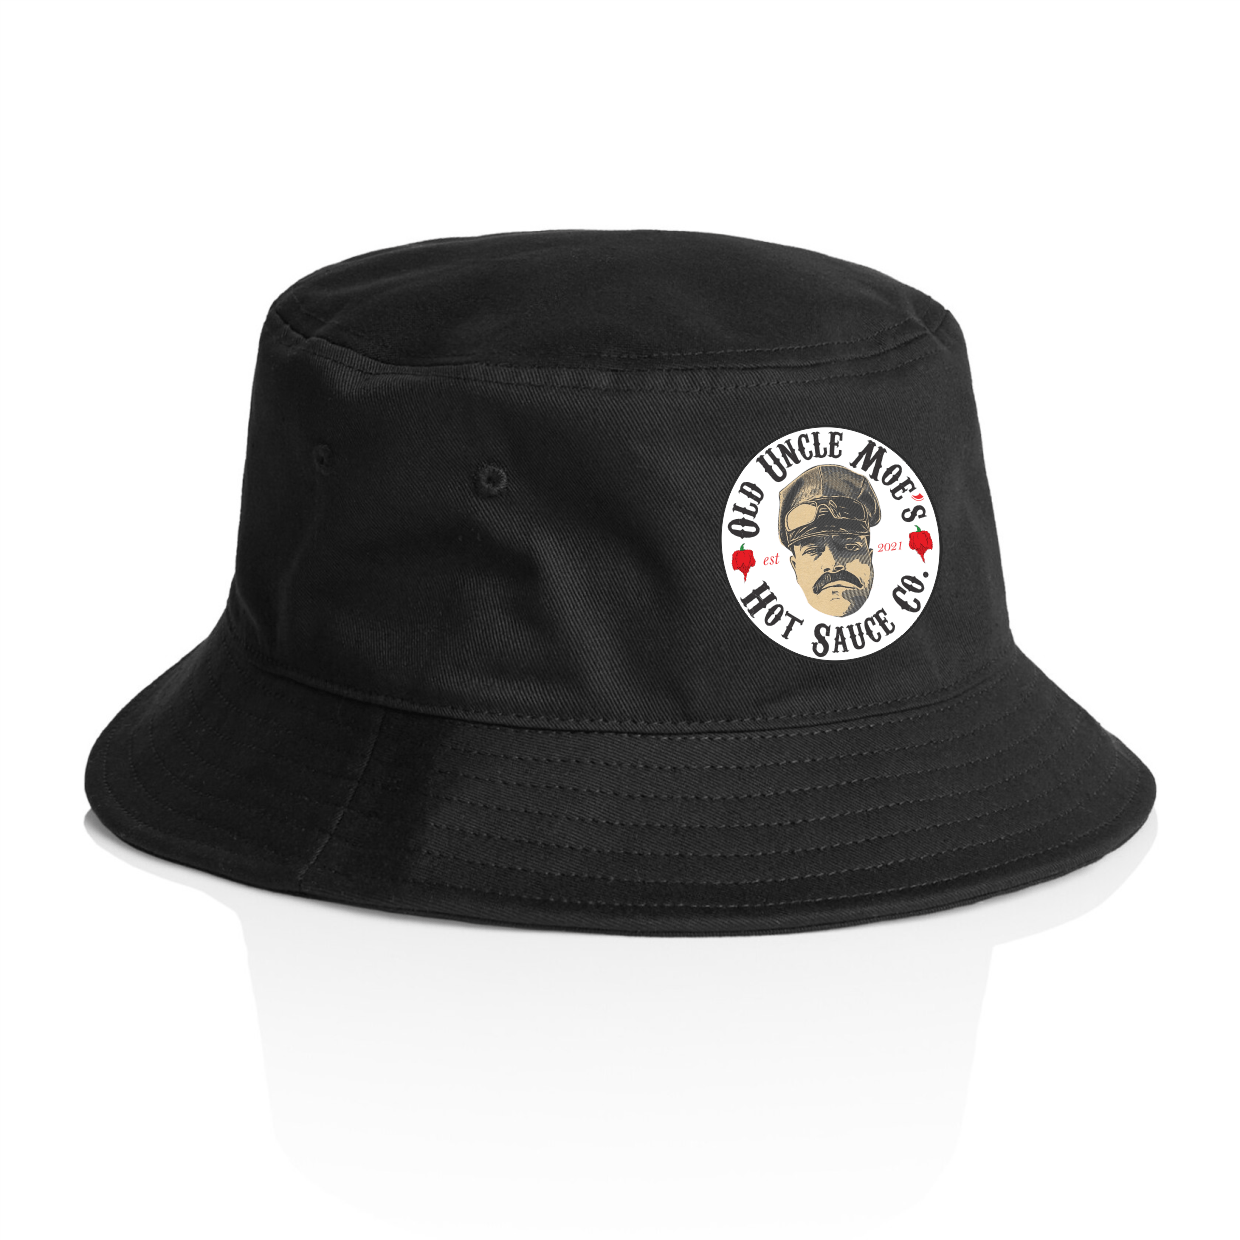 Uncle Moe's Hot Sauce Co - Bucket Hat - Three 3s Apparel and Merch